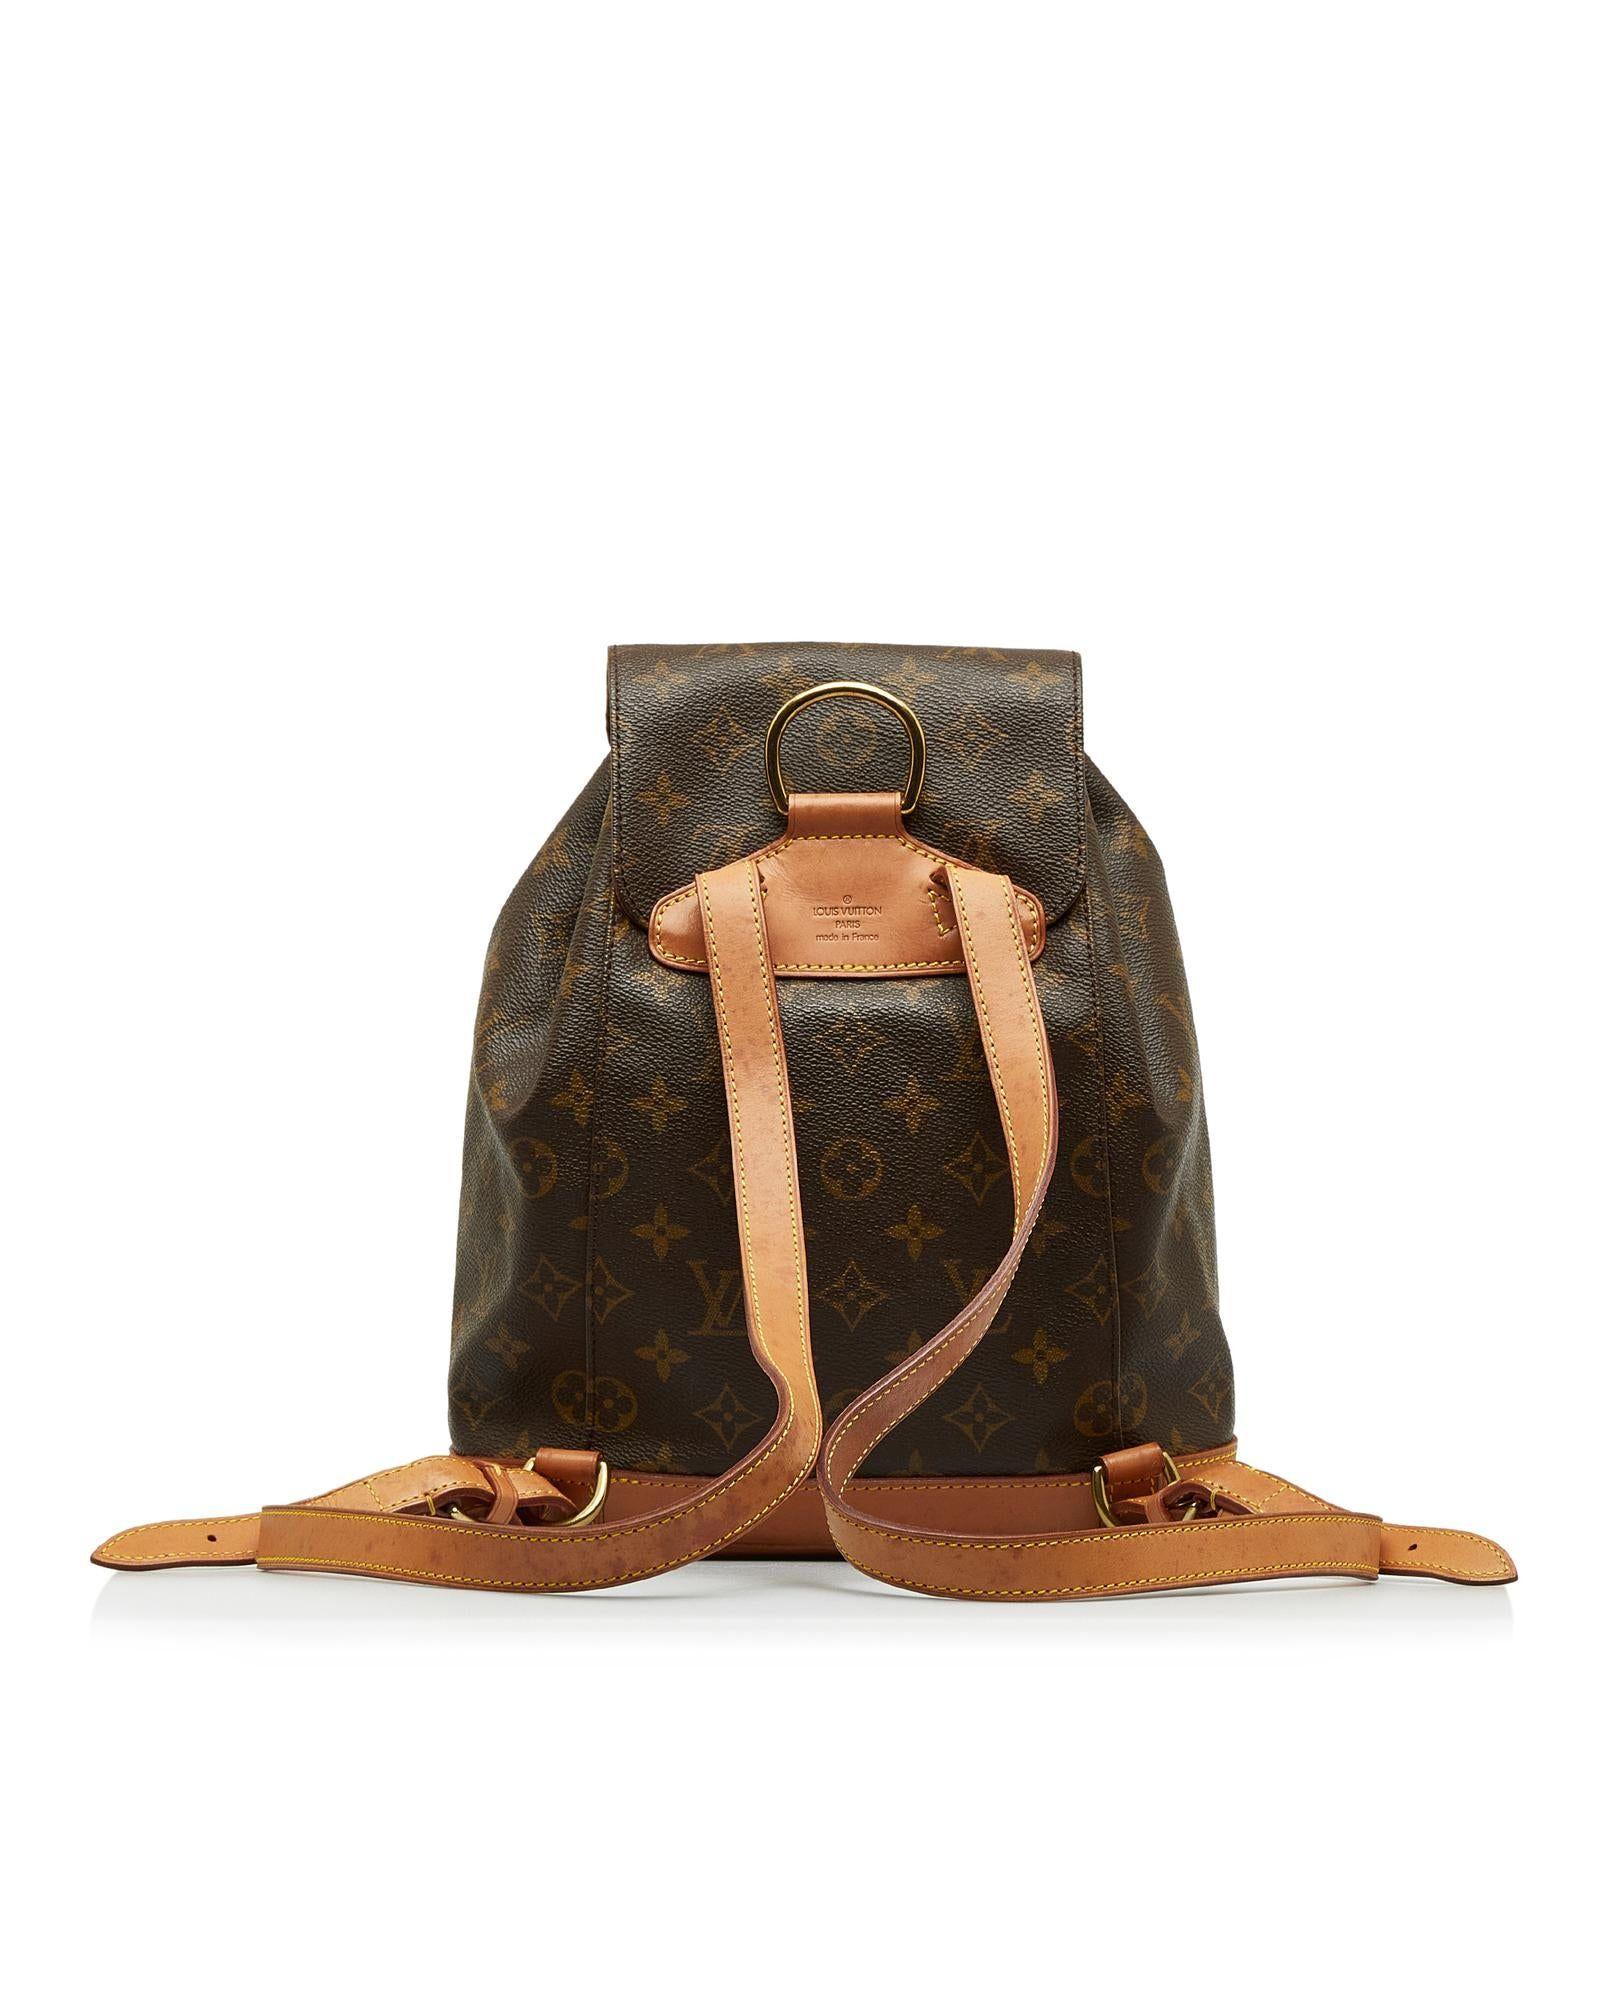 Louis Vuitton Monogram Canvas Drawstring Backpack in Green